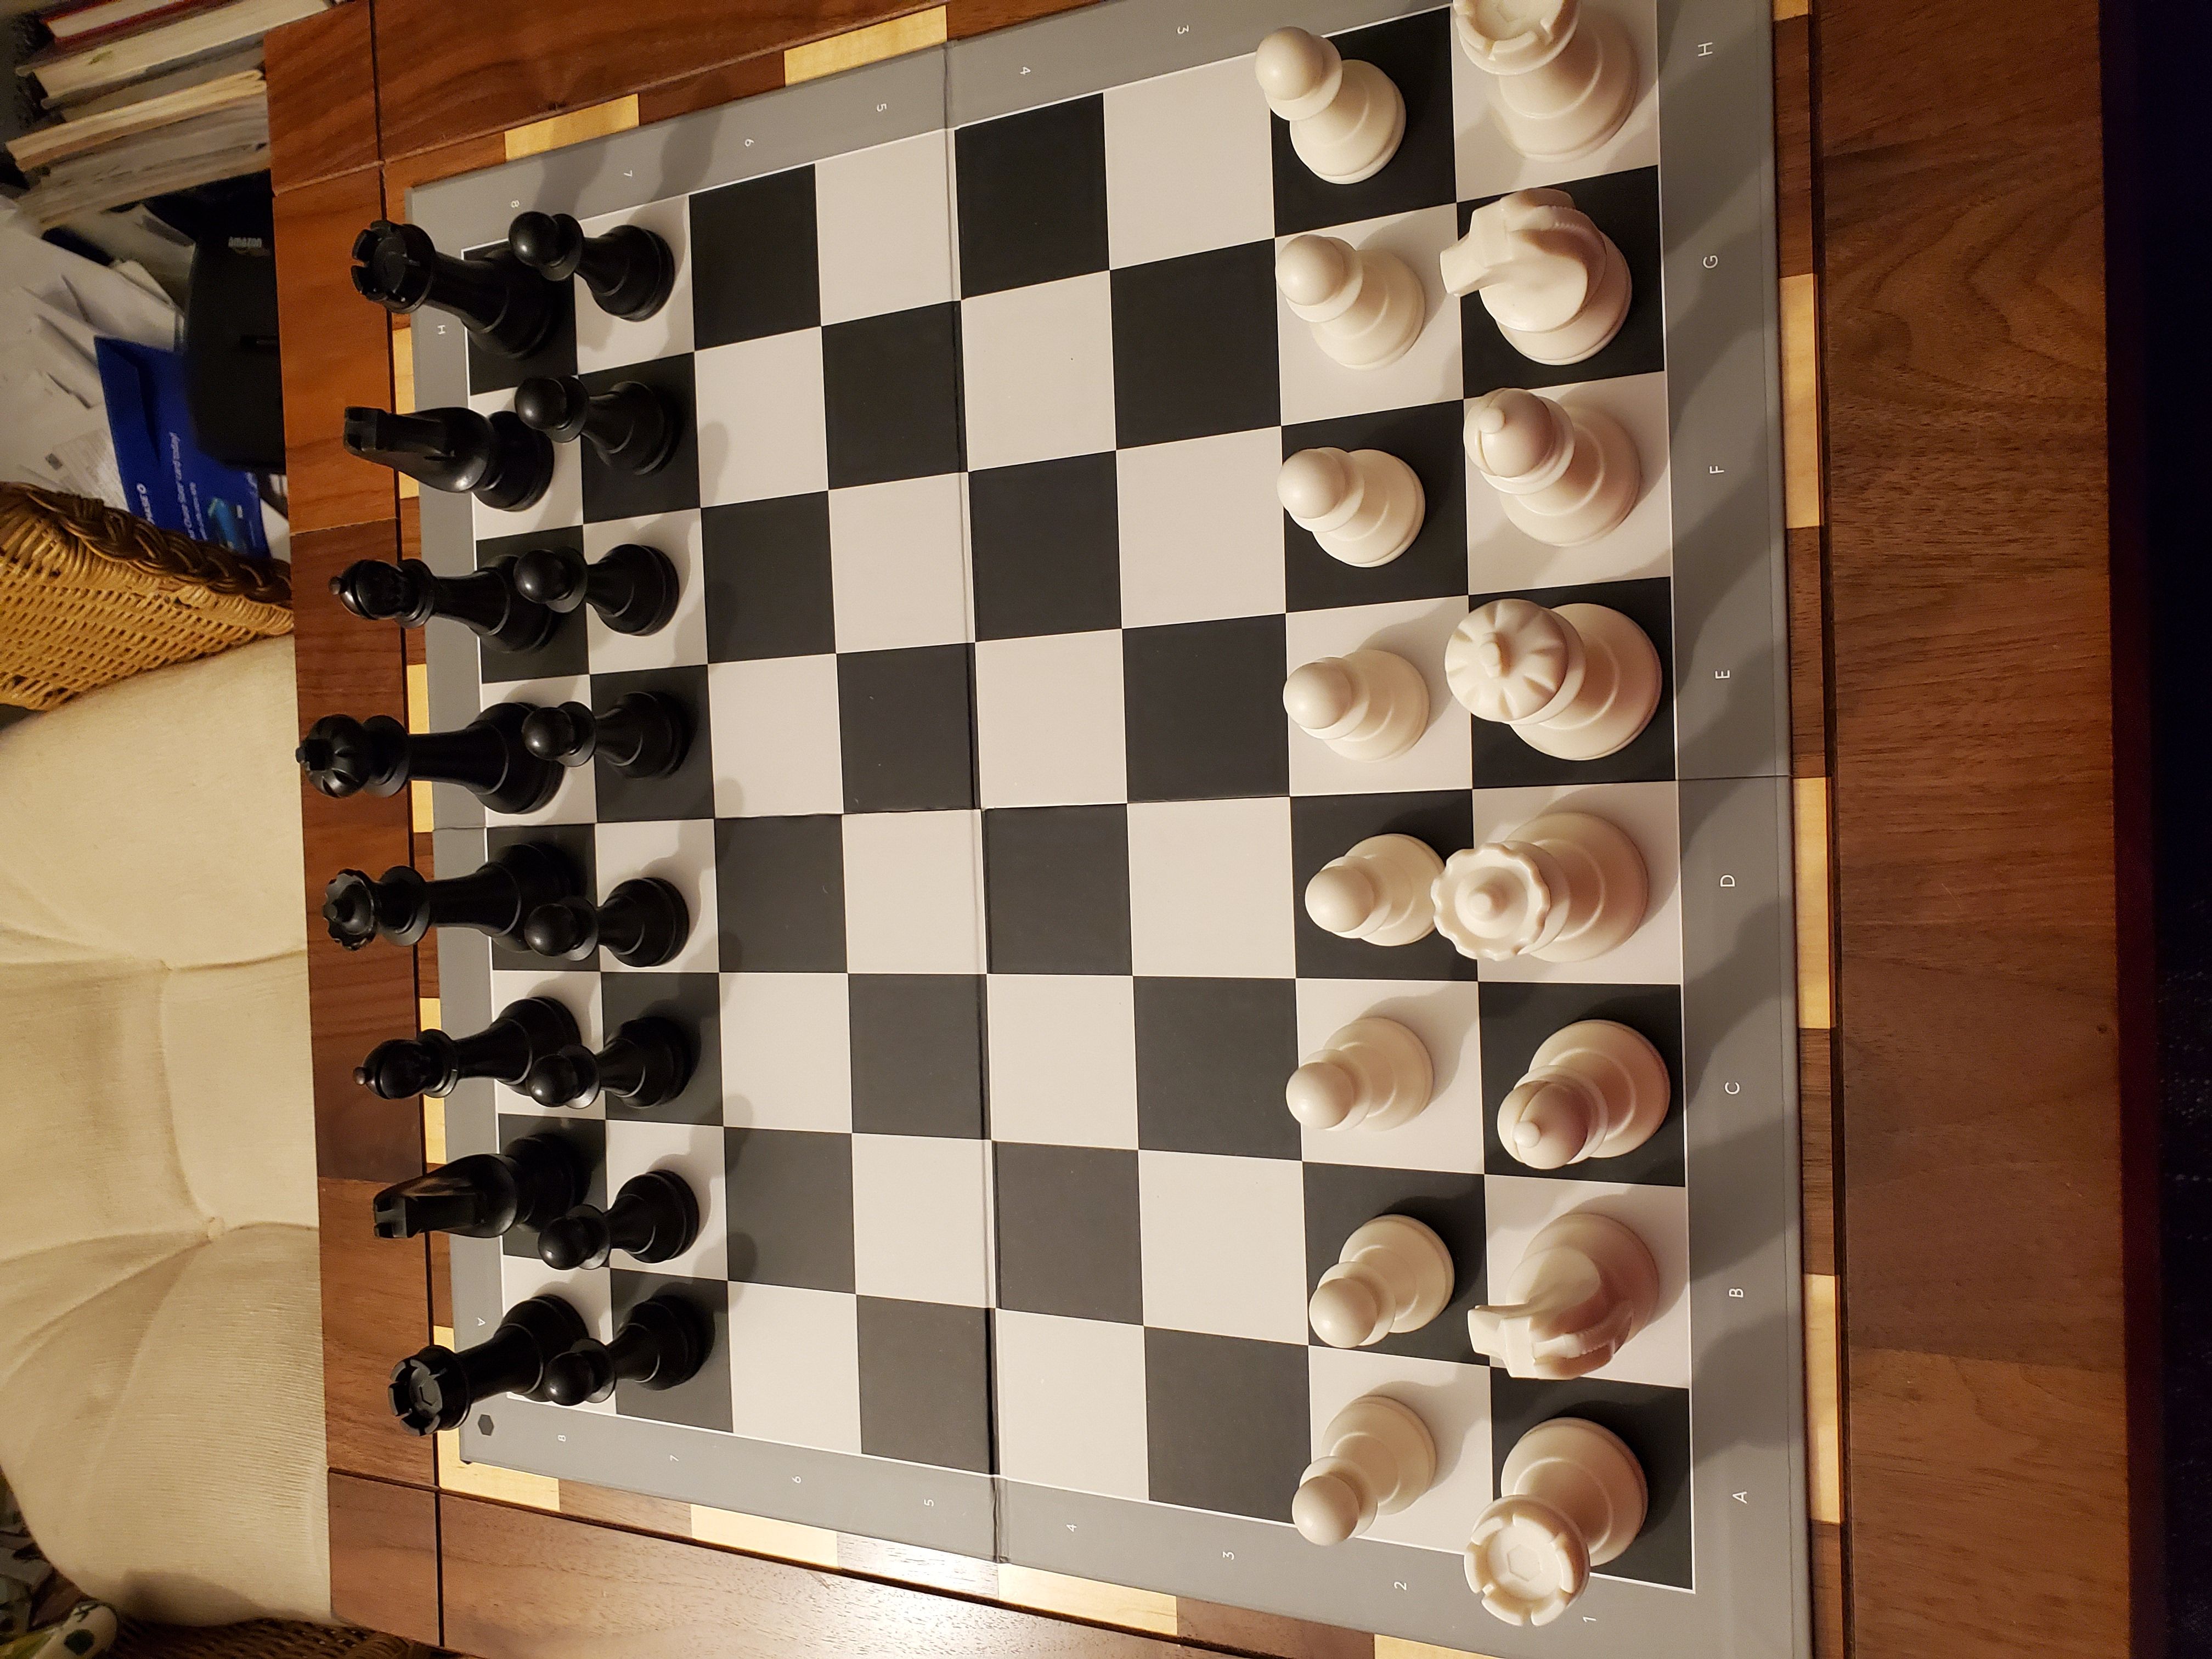 How to Play Chess, WorldChess Store